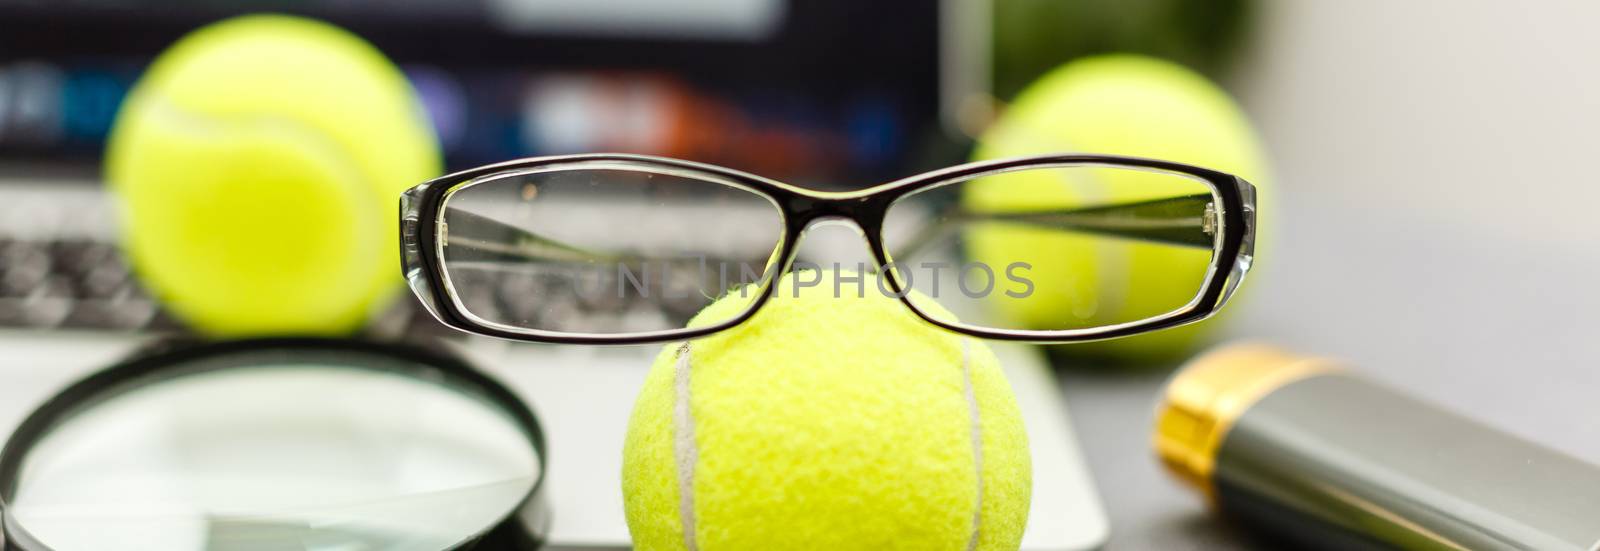 Top view of laptop, Sports Equipment, Tennis ball, glasses on the Sports administration white table.Business concept. by Andelov13